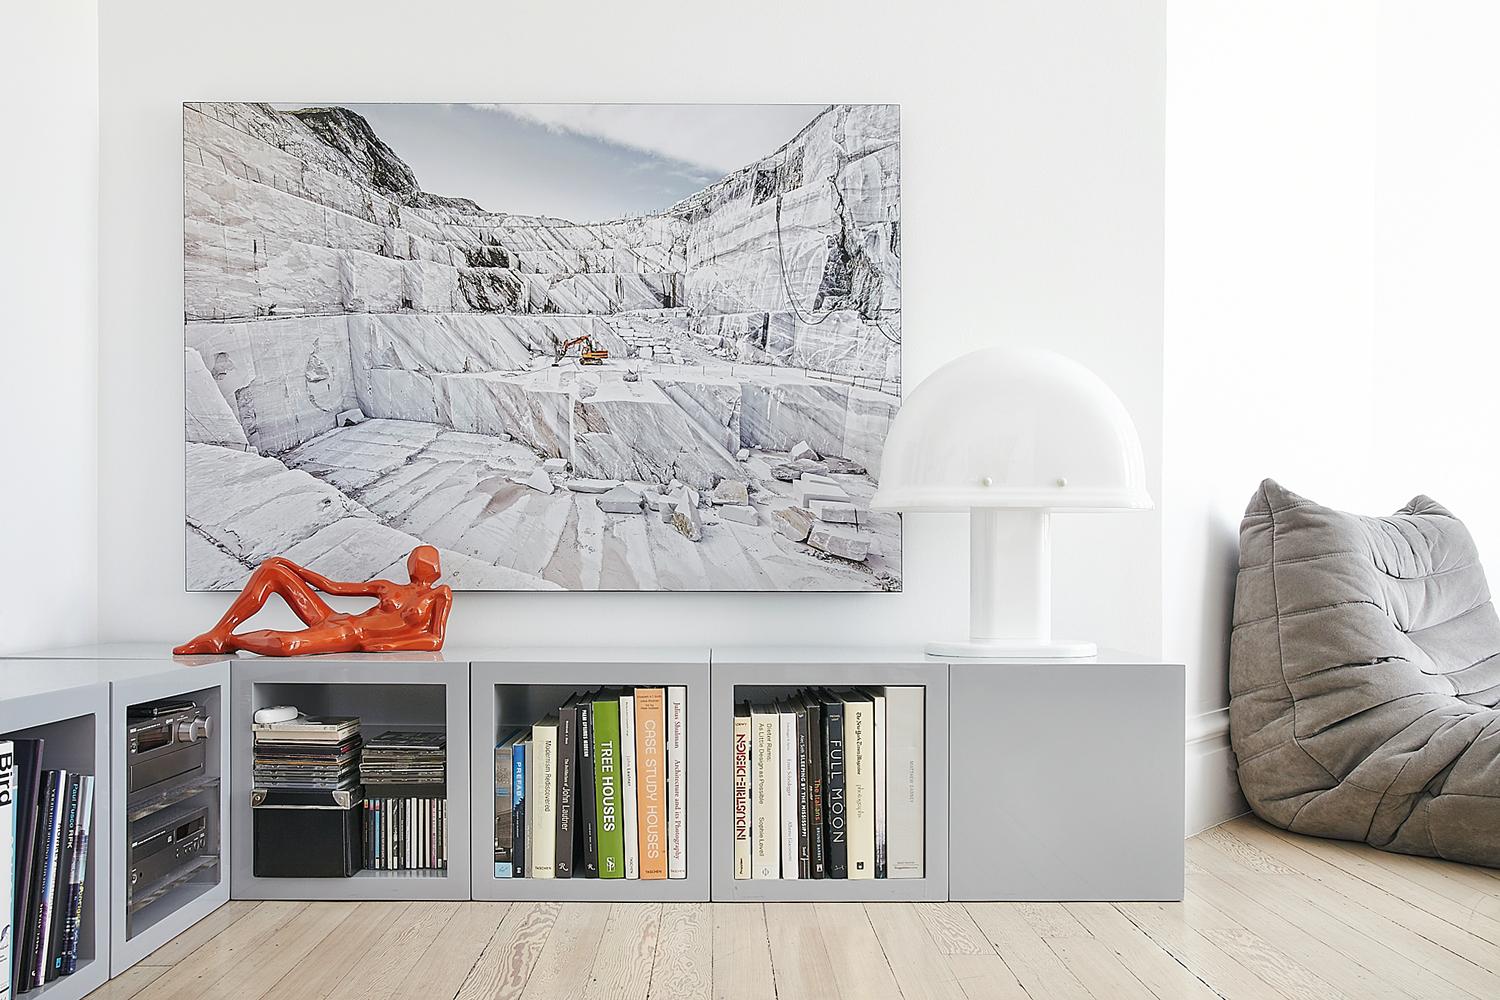 Marmo di Carrara - large format photograph of iconic Italian marble quarry - Contemporary Photograph by Frank Schott